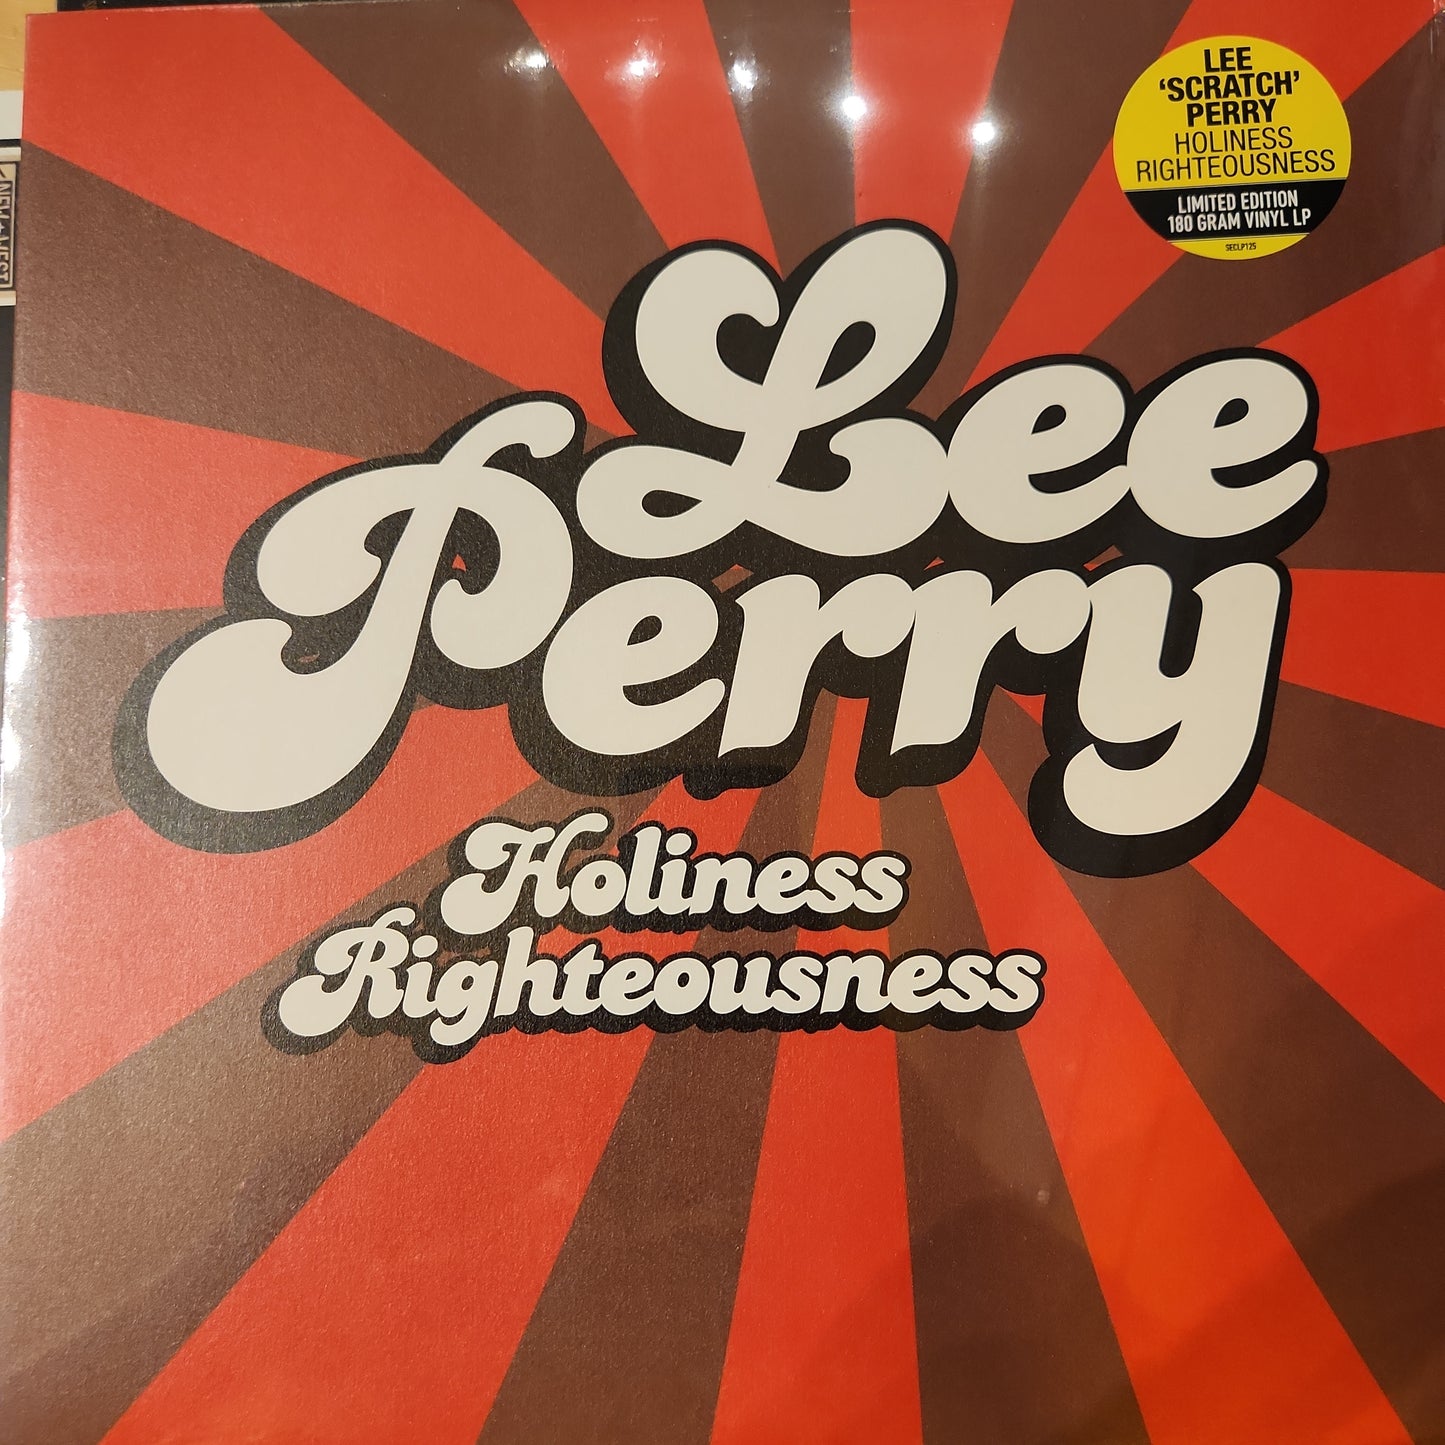 Lee Scratch Perry - Holiness Righteousness - Vinyl LP